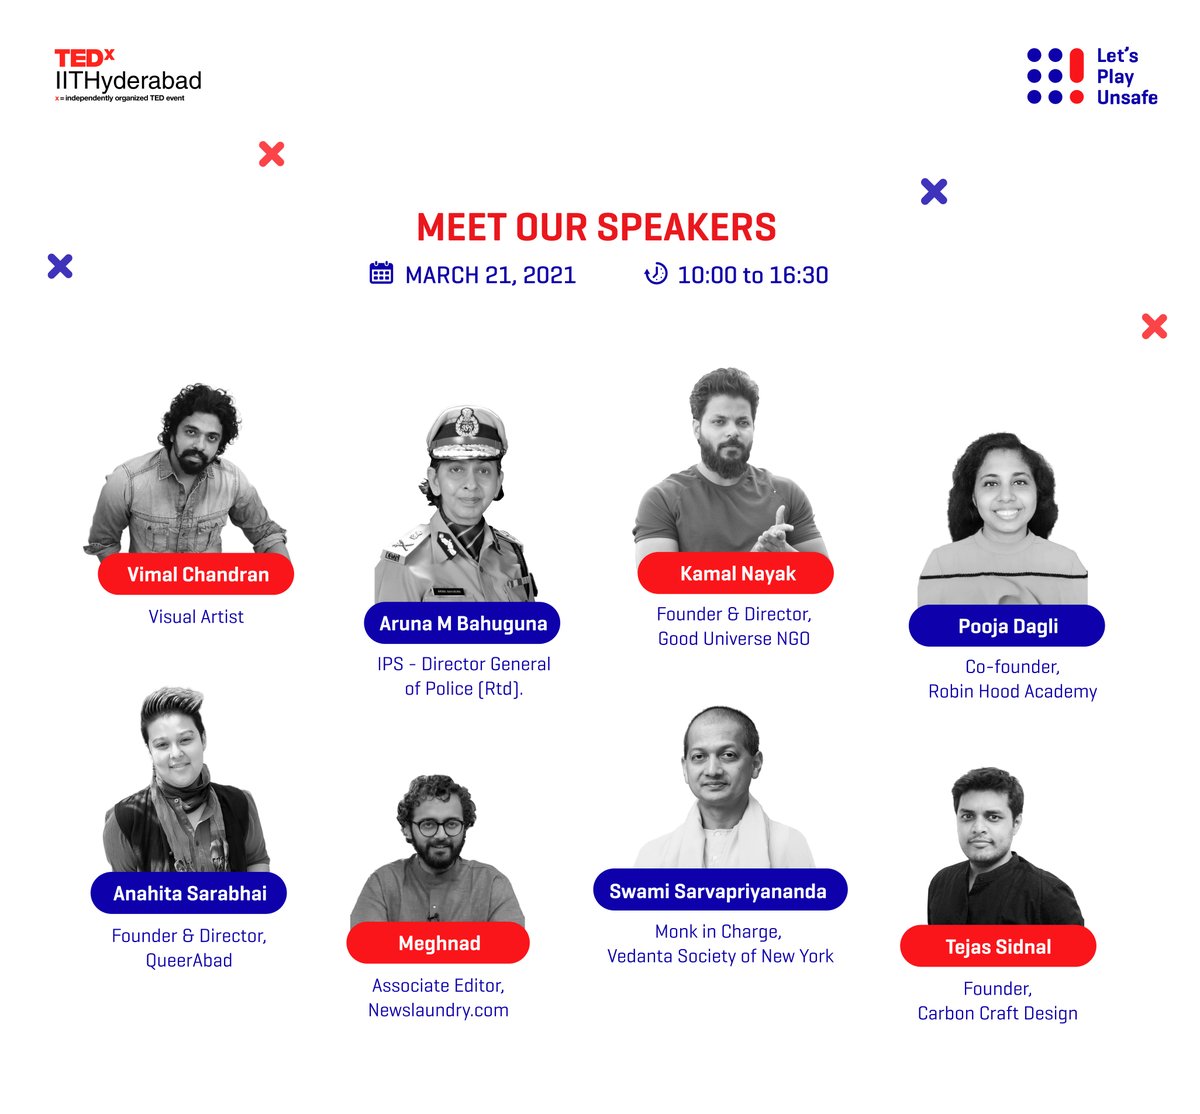 TEDxIITHyderabad is a stand-alone TED event co-ordinated by a team of deeply motivated students

Get ready to experience the diverse notions of Playing (Un)Safe on 21st March 2021, here at TEDx IIT Hyderabad.

Register Now: dare2compete.com/o/tedxiithyder…